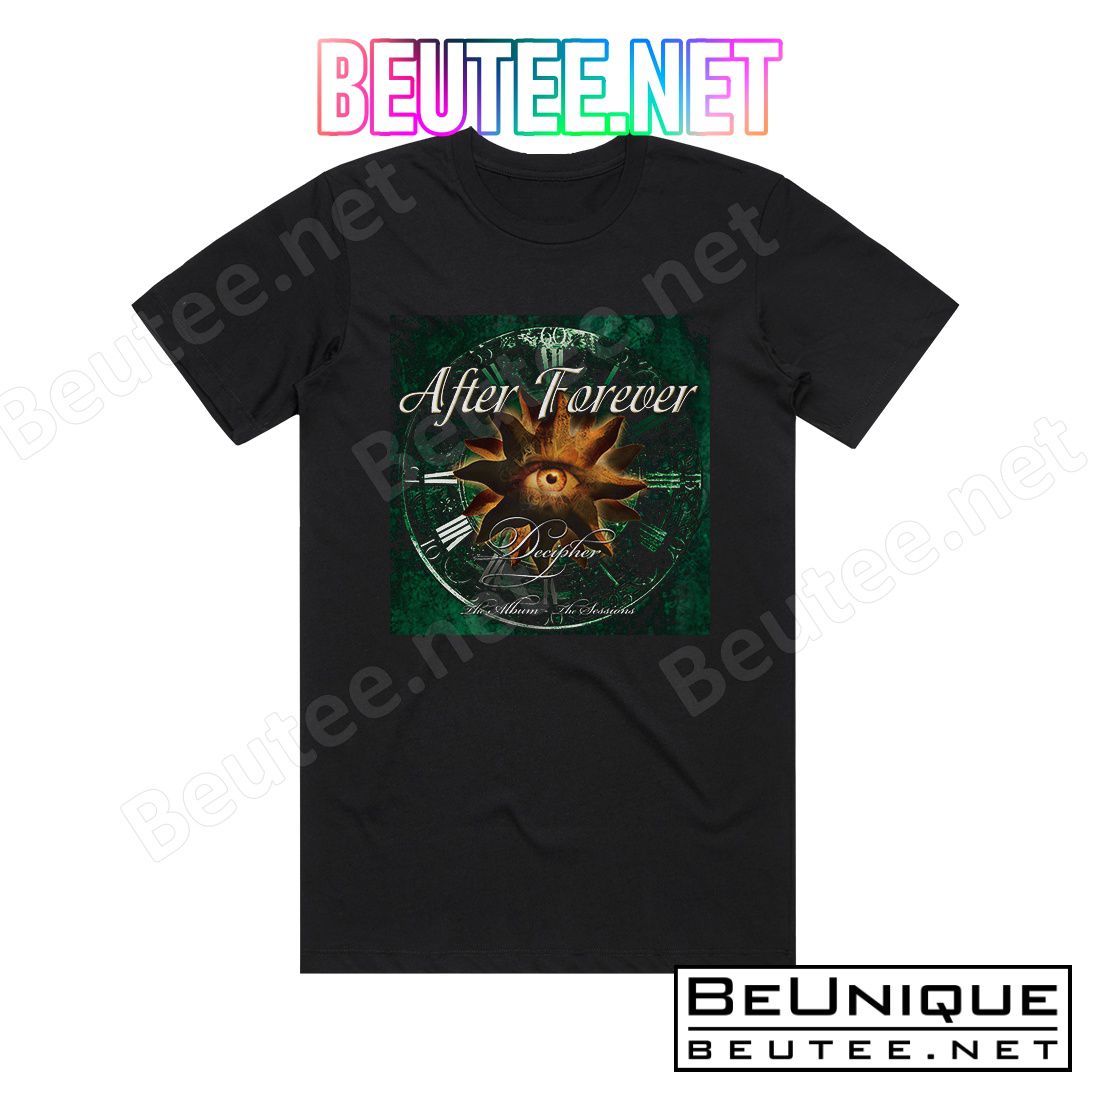 After Forever Decipher Album Cover T-shirt